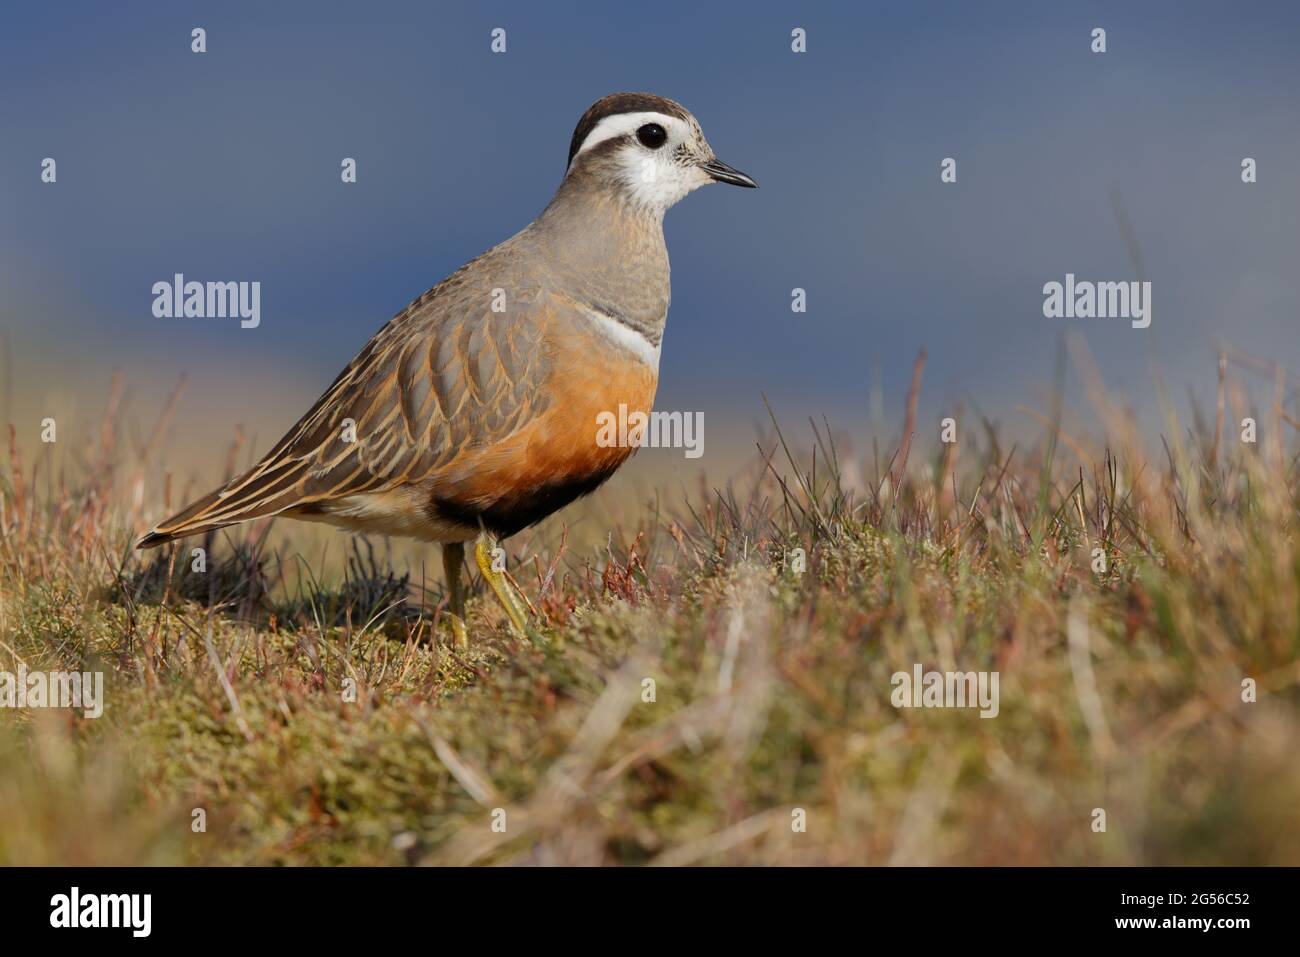 An adult female Eurasian Dotterel (Charadrius morinellus) in breeding plumage at the traditional migration staging post of Pendle Hill, Lancashire, UK Stock Photo